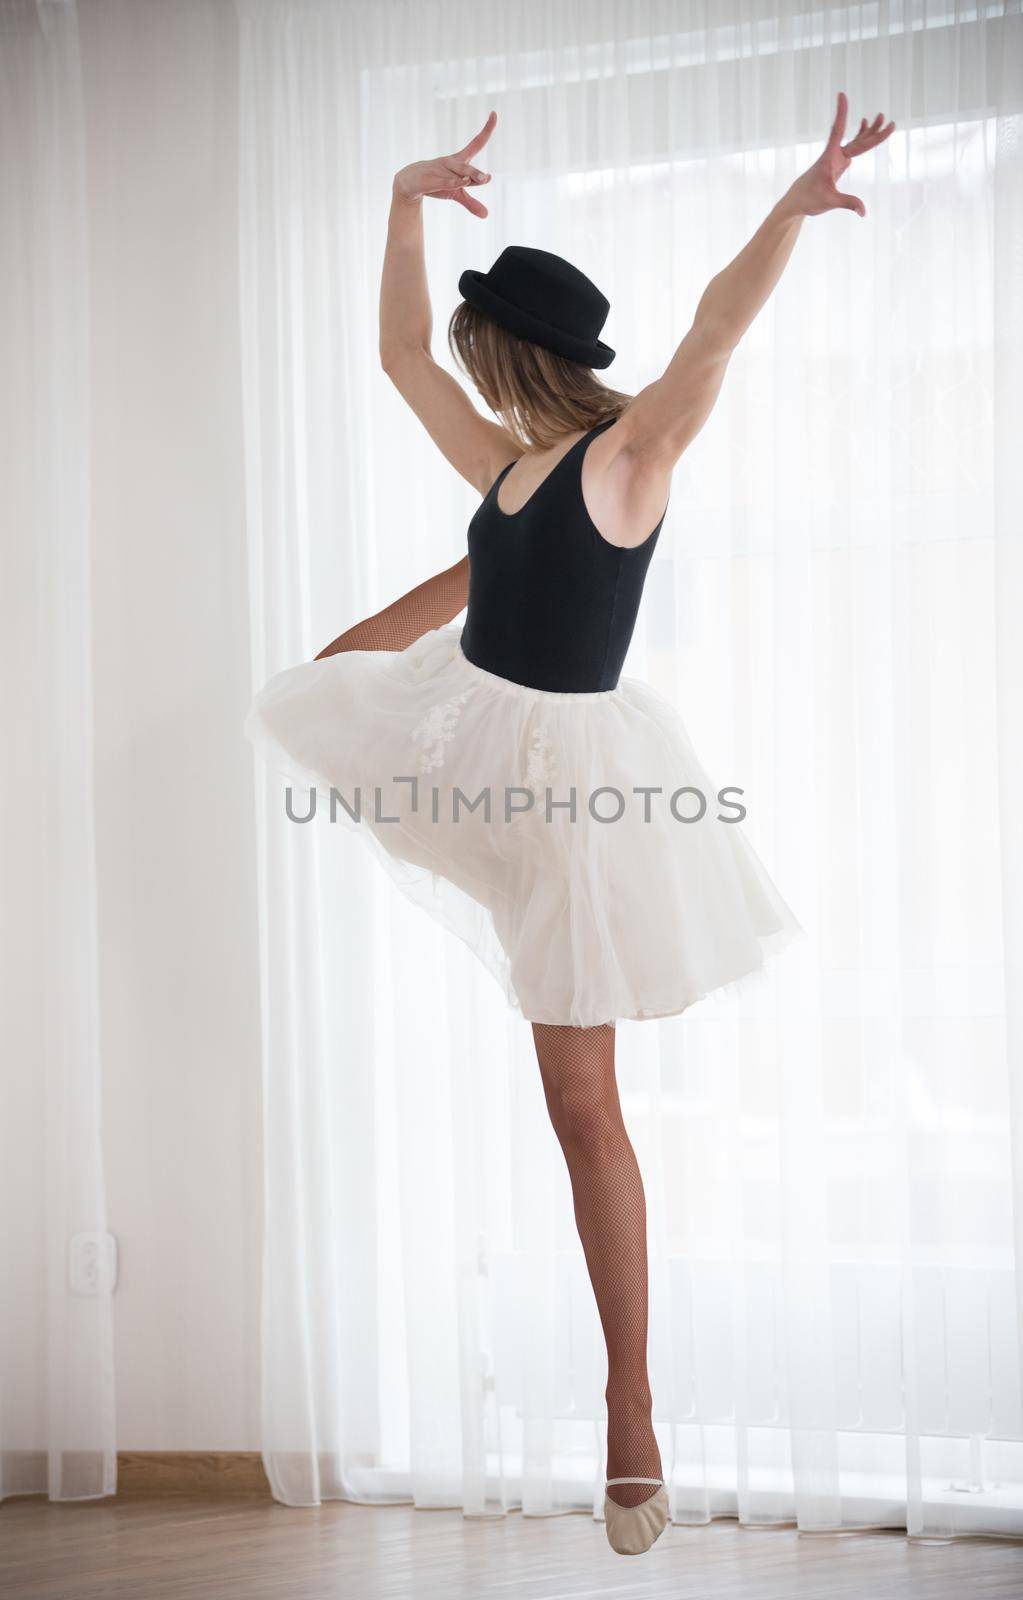 Ballerina in hat stands near the window, raises her leg, in a bright studio by Studia72